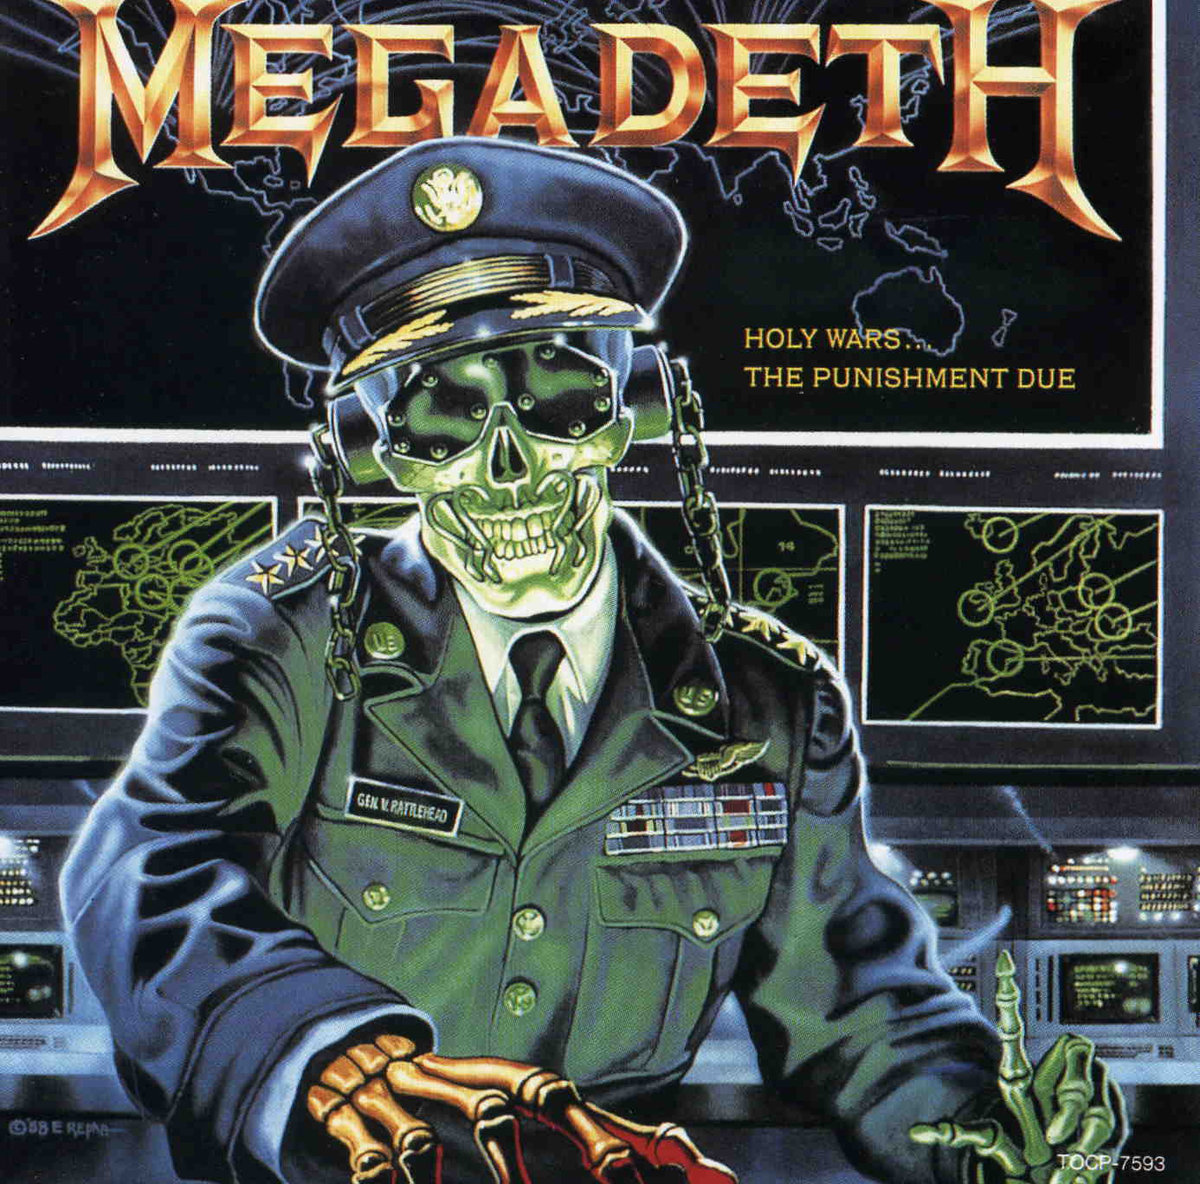 Holy Wars... The Punishment Due Megadeth Ed Repka